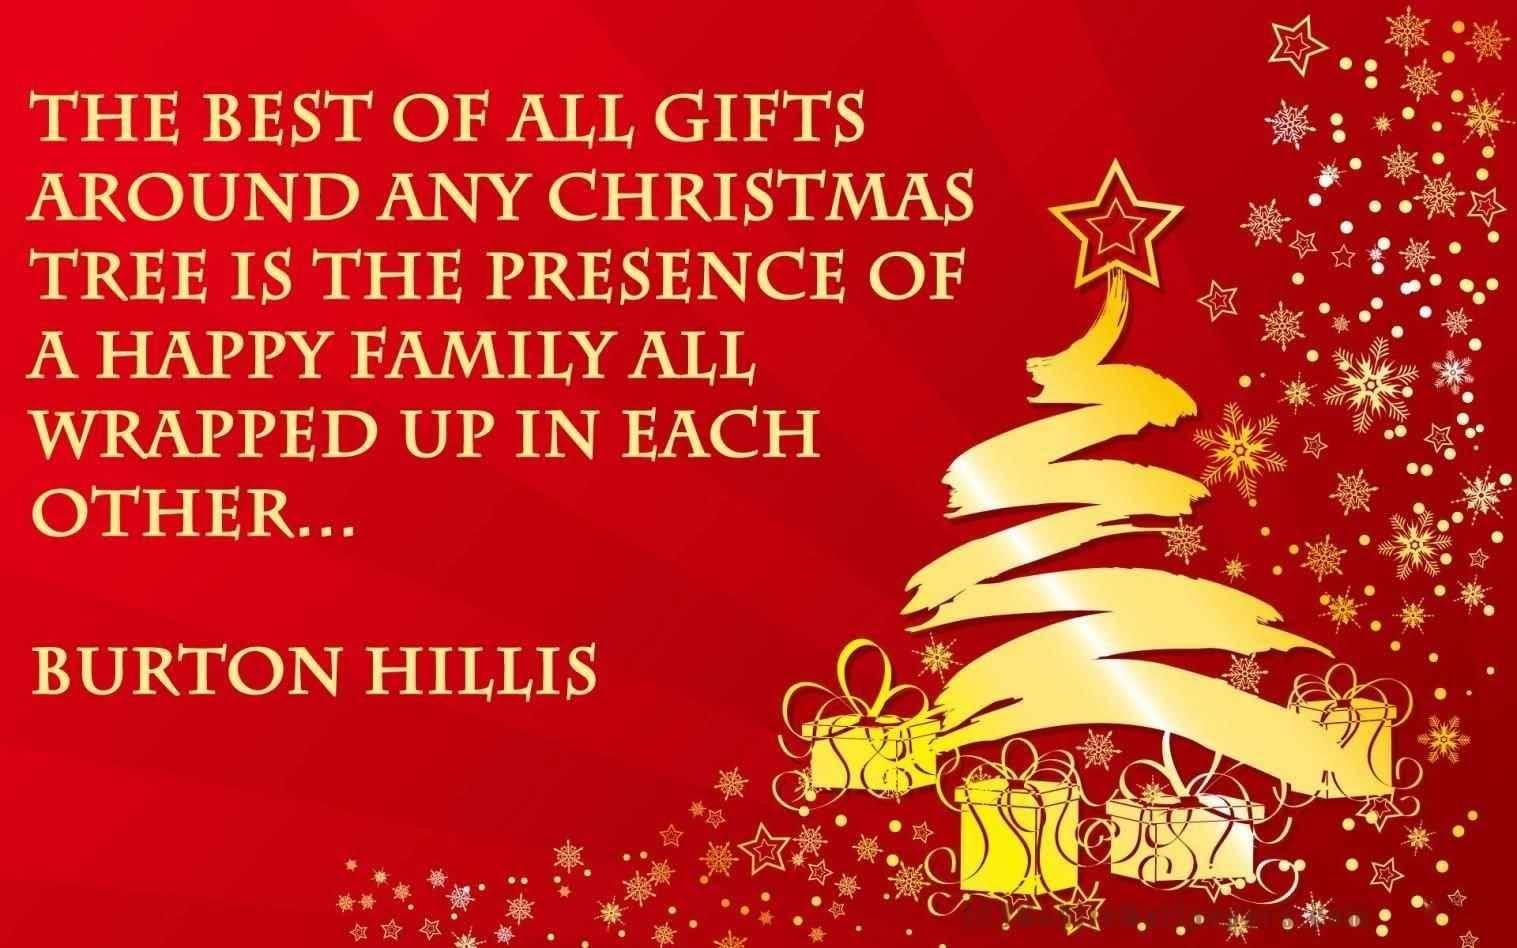 Christmas Quotes For Family Image Picture Photo Wallpaper 05